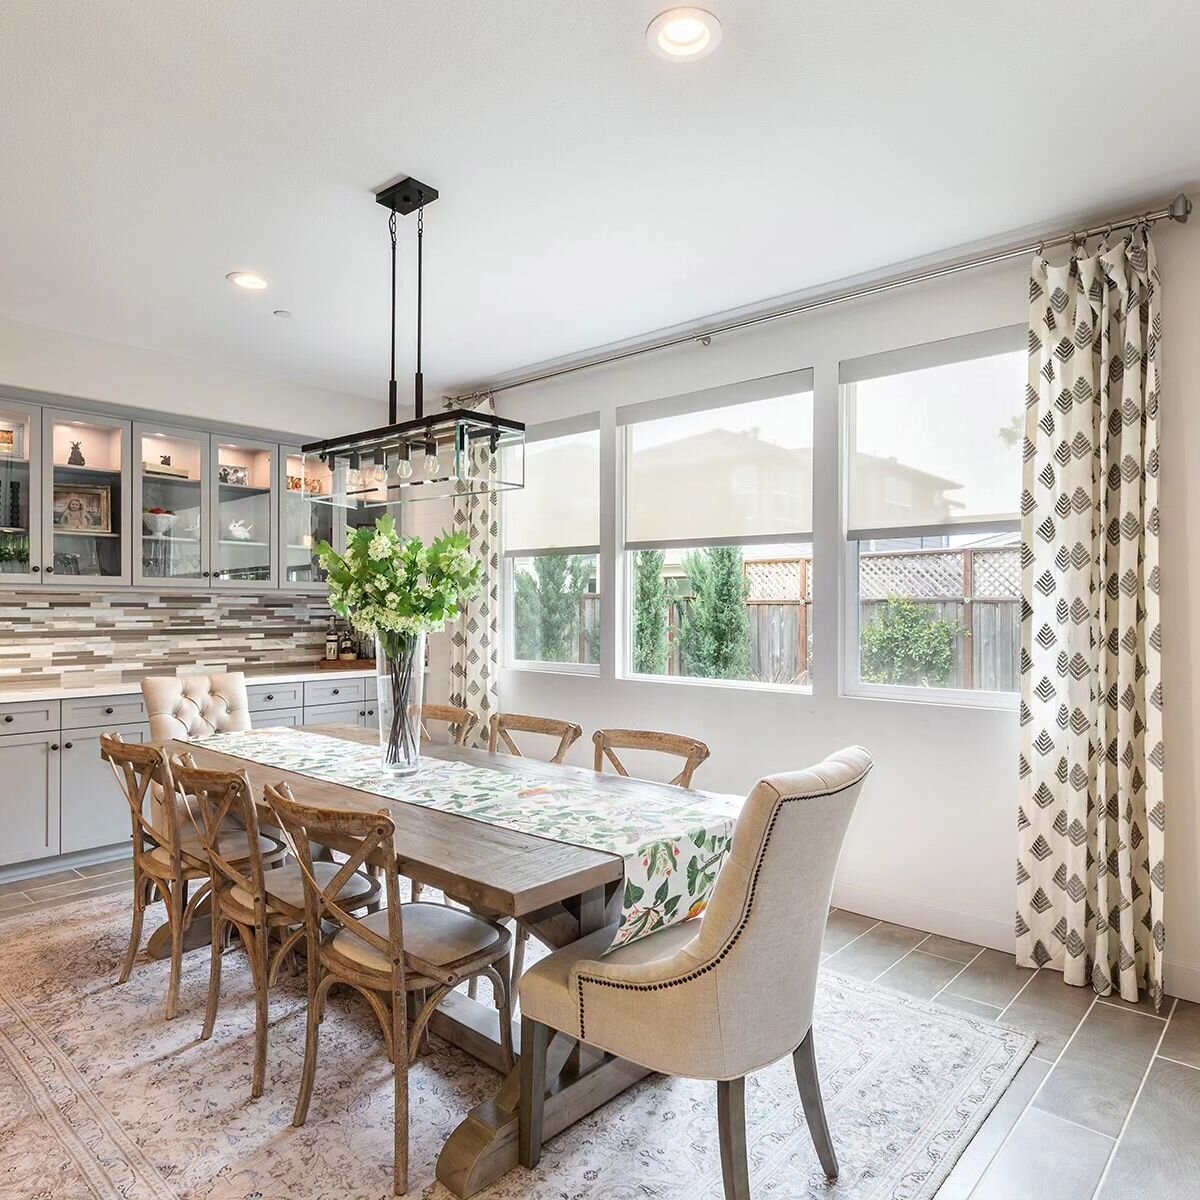 Relish every feature of this Turnkey Home

JUST LISTED! 📍2429 Francisco Ave Santa Rosa, CA 95403

This feature rich home consists of 2743sf with 4 bedrooms, including one bedroom on the main floor, 3 full baths and a loft. Enjoy luxury finishes and 